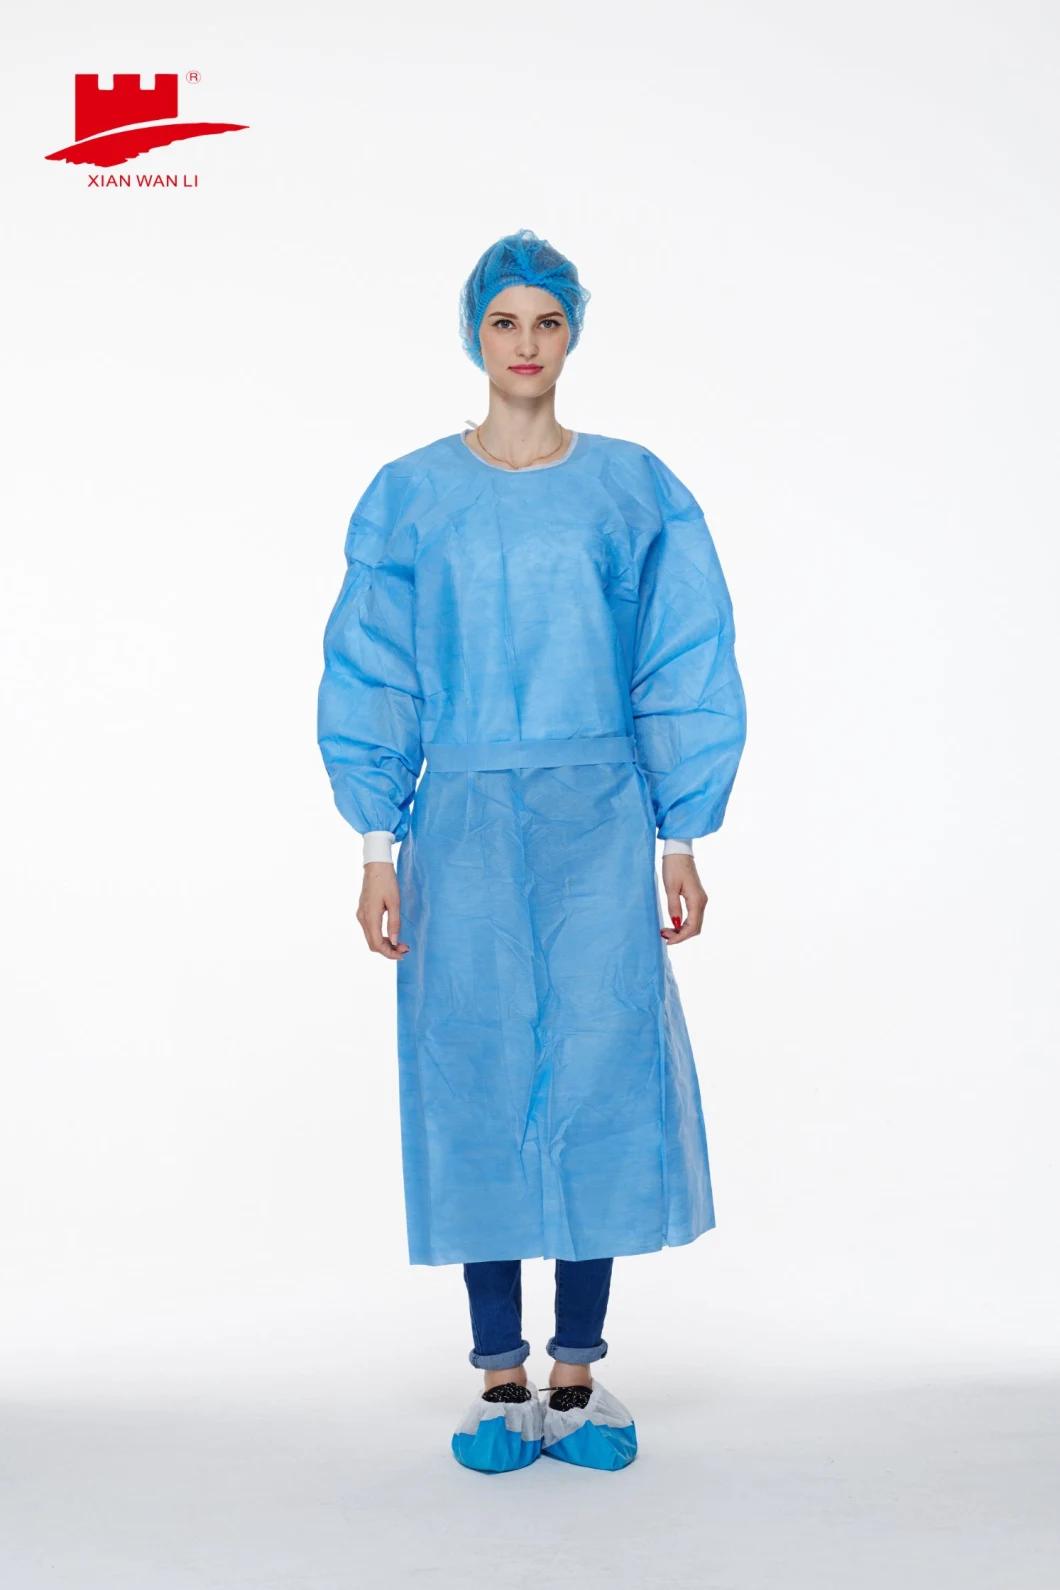 High Quality En 13795 Level 3 SMS Medical Isolation Gowns with Knitted Cuff for Doctors Nurse